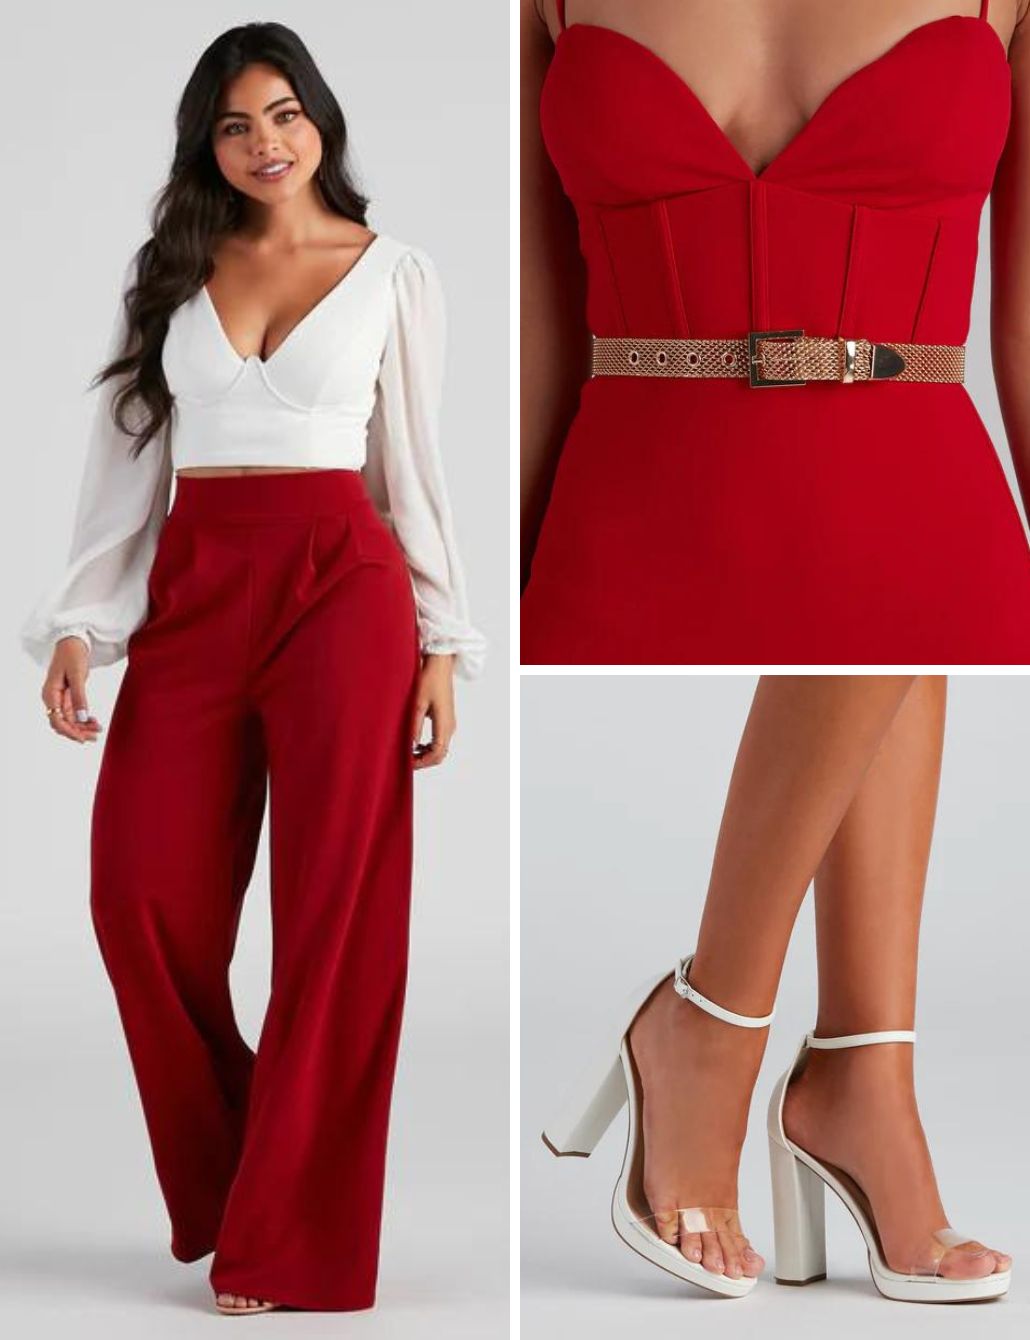 Corset Outfit Ideas for Brunch to Date Night